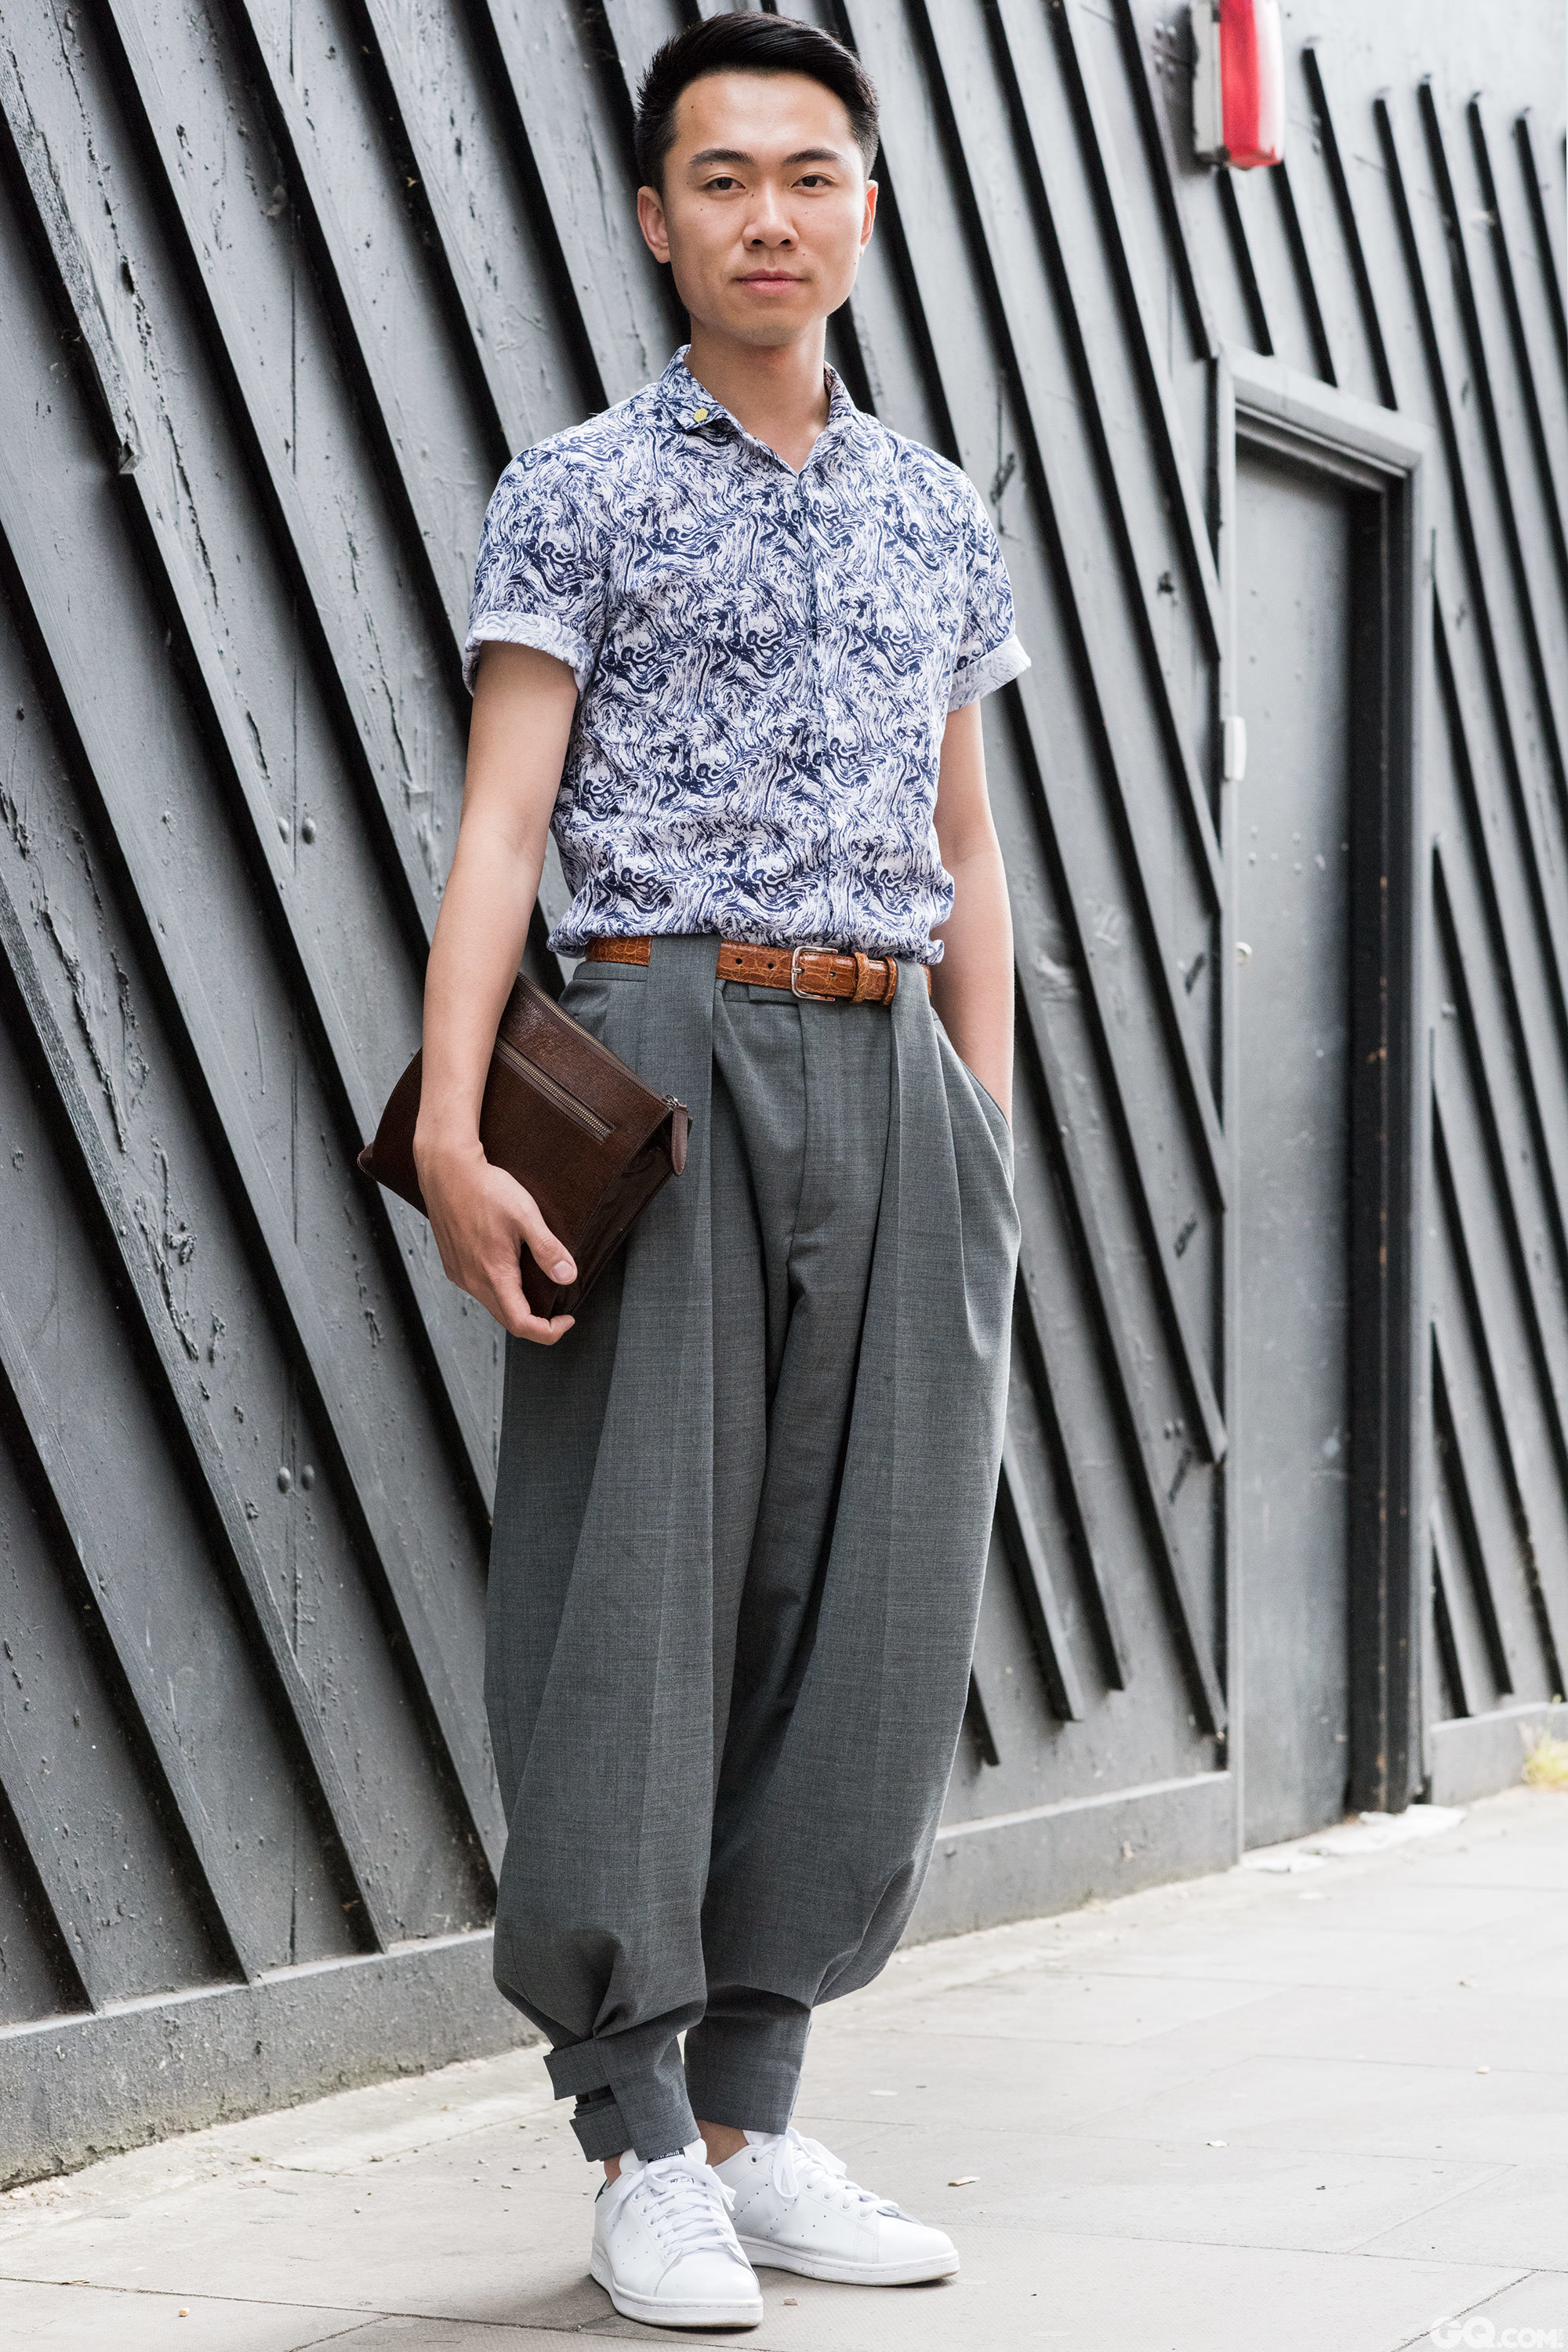 Kevin
Shirt: Top Man
Trousers: Q by McQueen
Shoes: Adidas by Sam Smith
Clutch: Dries Van Noten

Inspiration: I just got the trousers and I wanted them to be the showpiece. I kind of tried to wear something easy that got well together with it. 刚刚买了裤子，想让这件单品成为重点和亮点，我会想尝试让配搭简单一些。